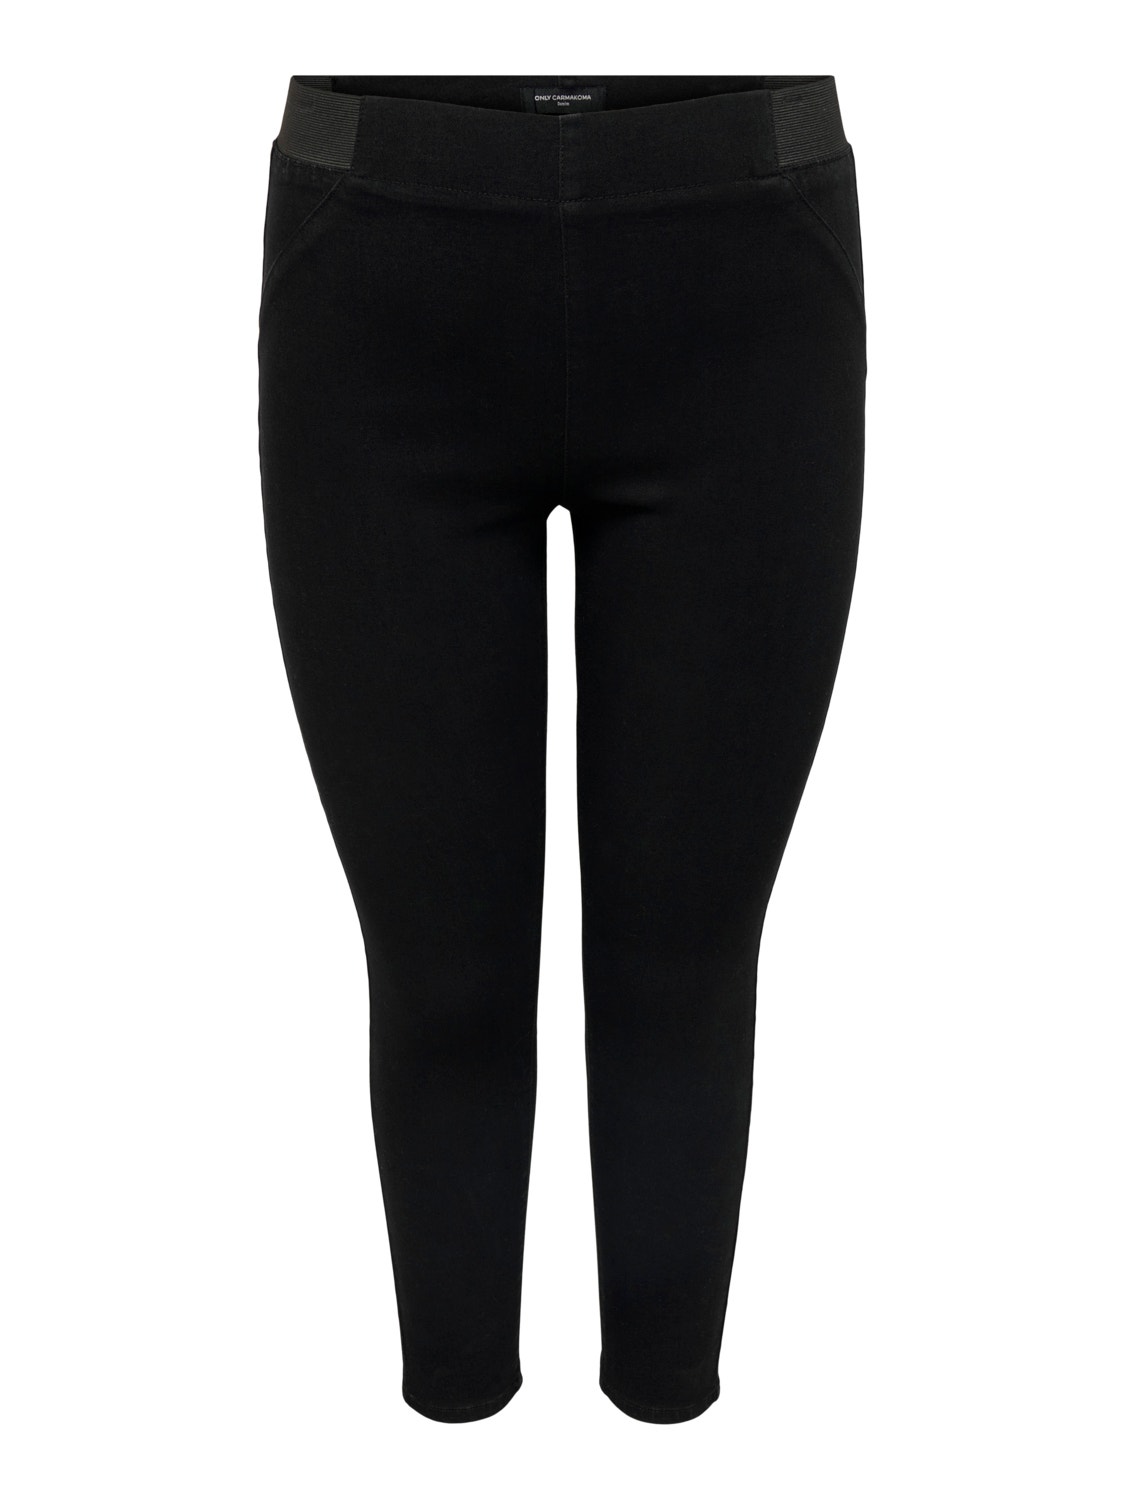 ONLY CARSally high-waist Skinny jeans -Black - 15256289